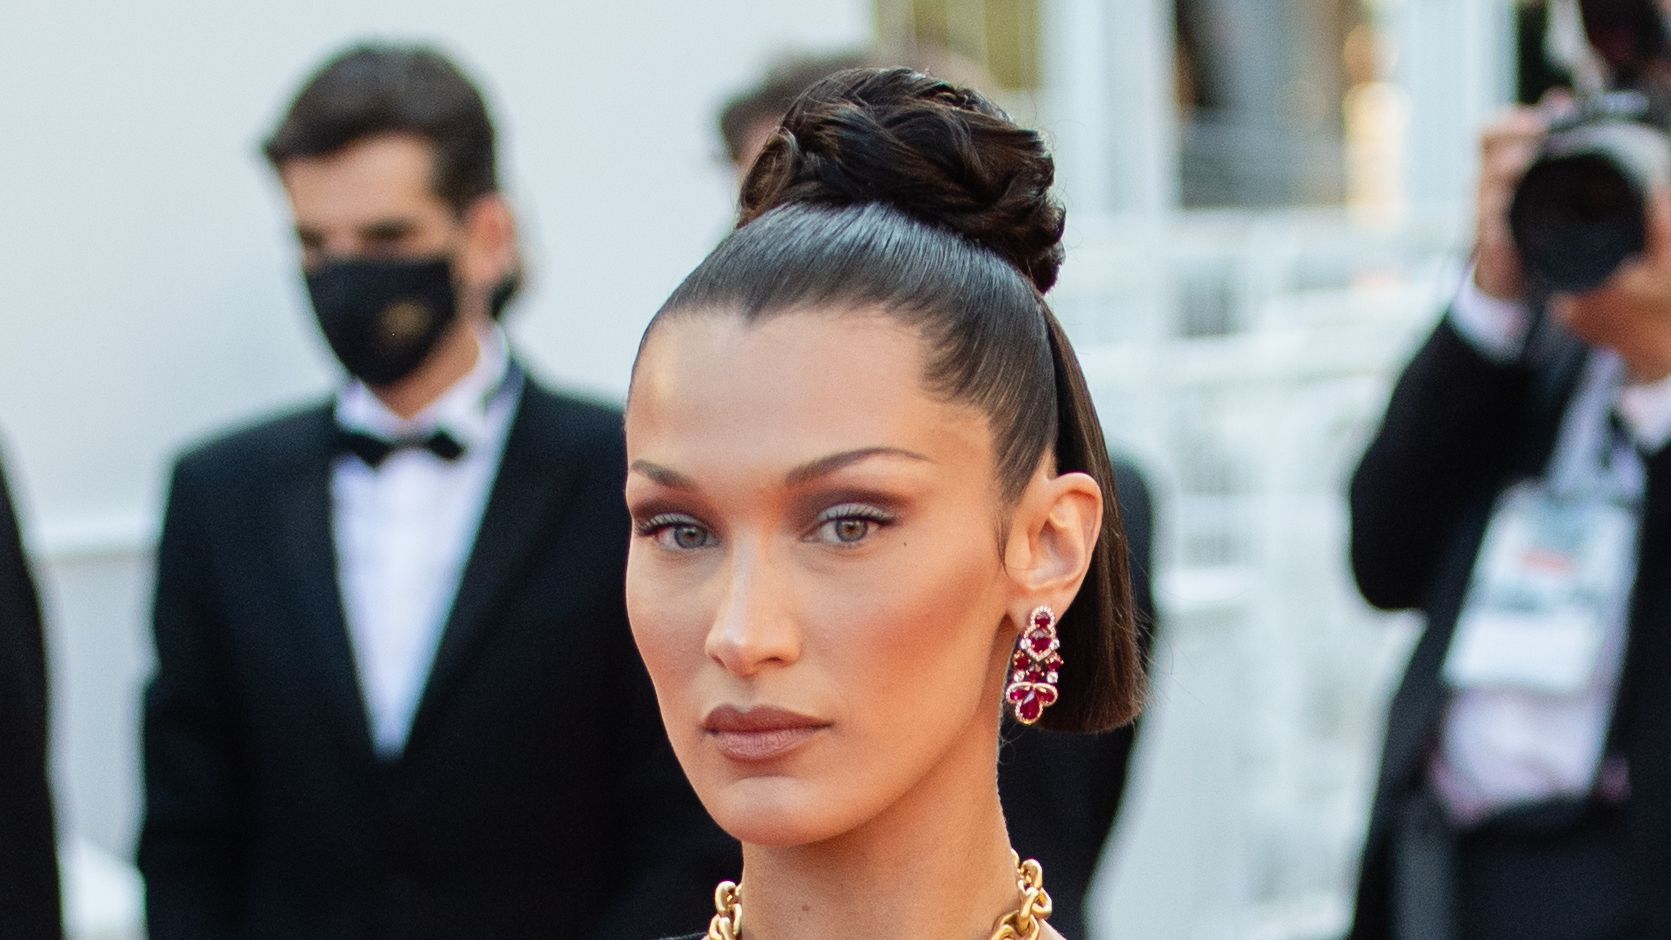 Bella Hadid Wore a Schiaparelli Necklace as a Top on the Cannes Red Carpet